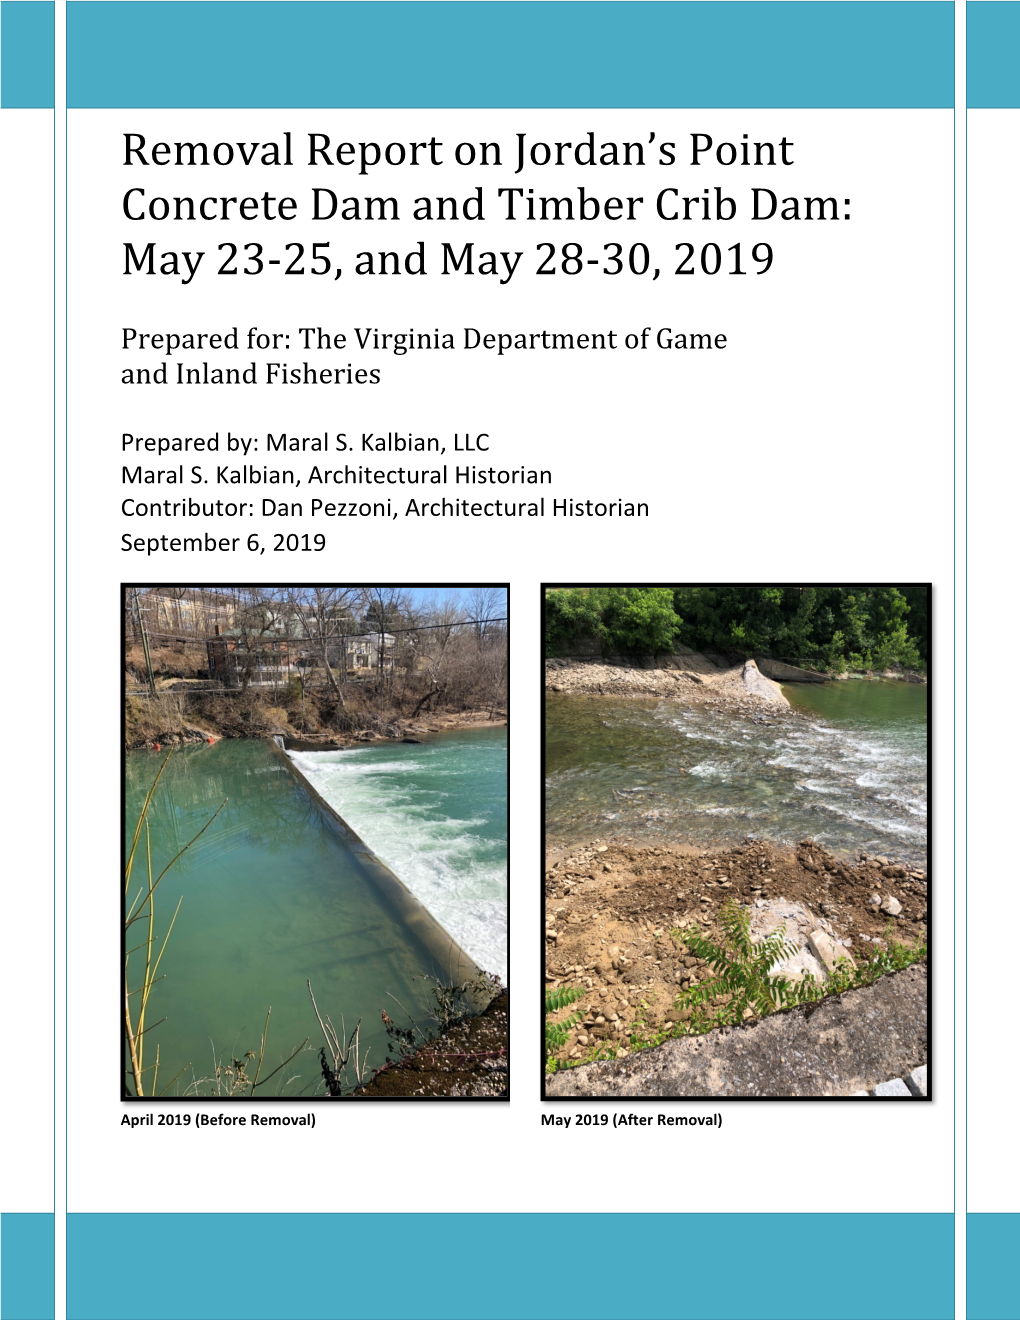 Removal Report on Jordan's Point Concrete Dam and Timber Crib